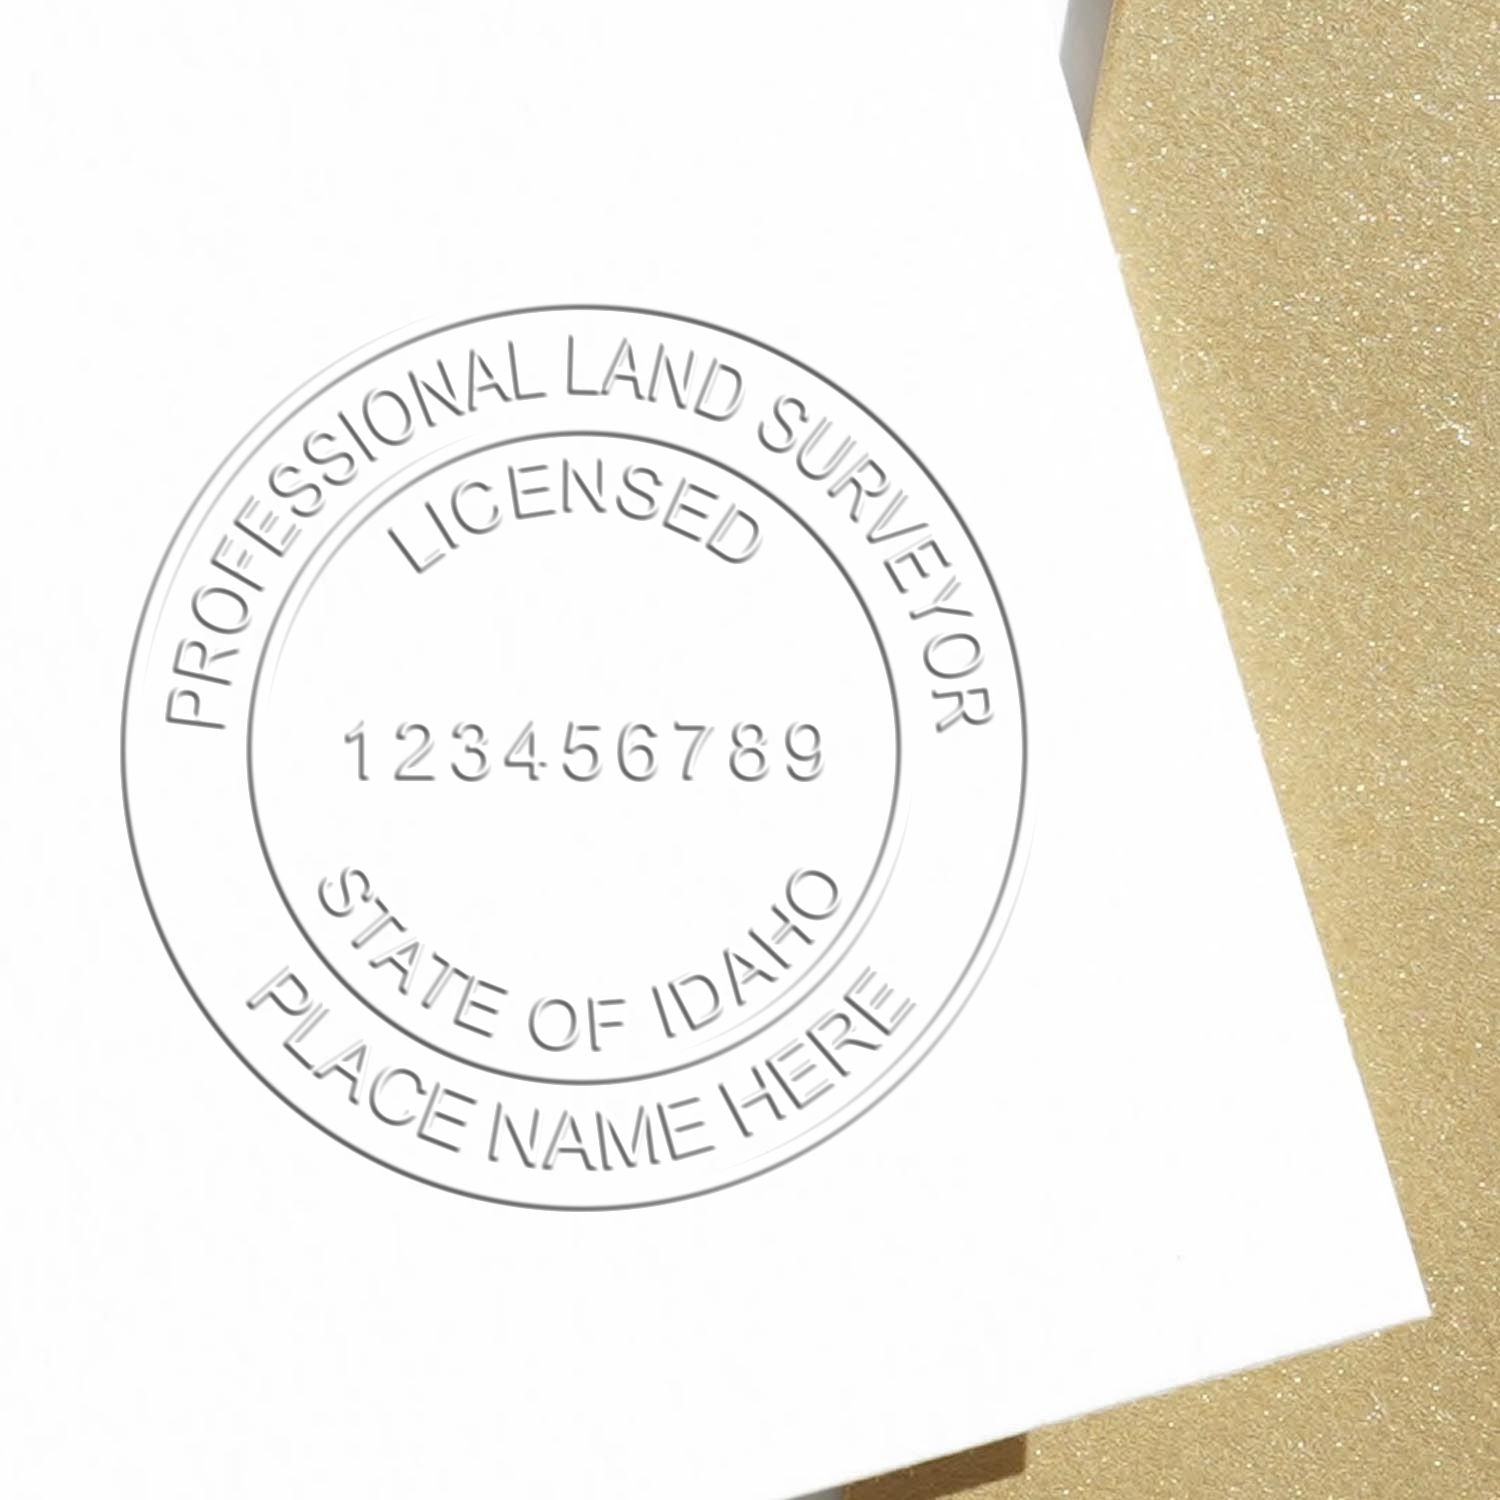 A stamped impression of the Long Reach Idaho Land Surveyor Seal in this stylish lifestyle photo, setting the tone for a unique and personalized product.